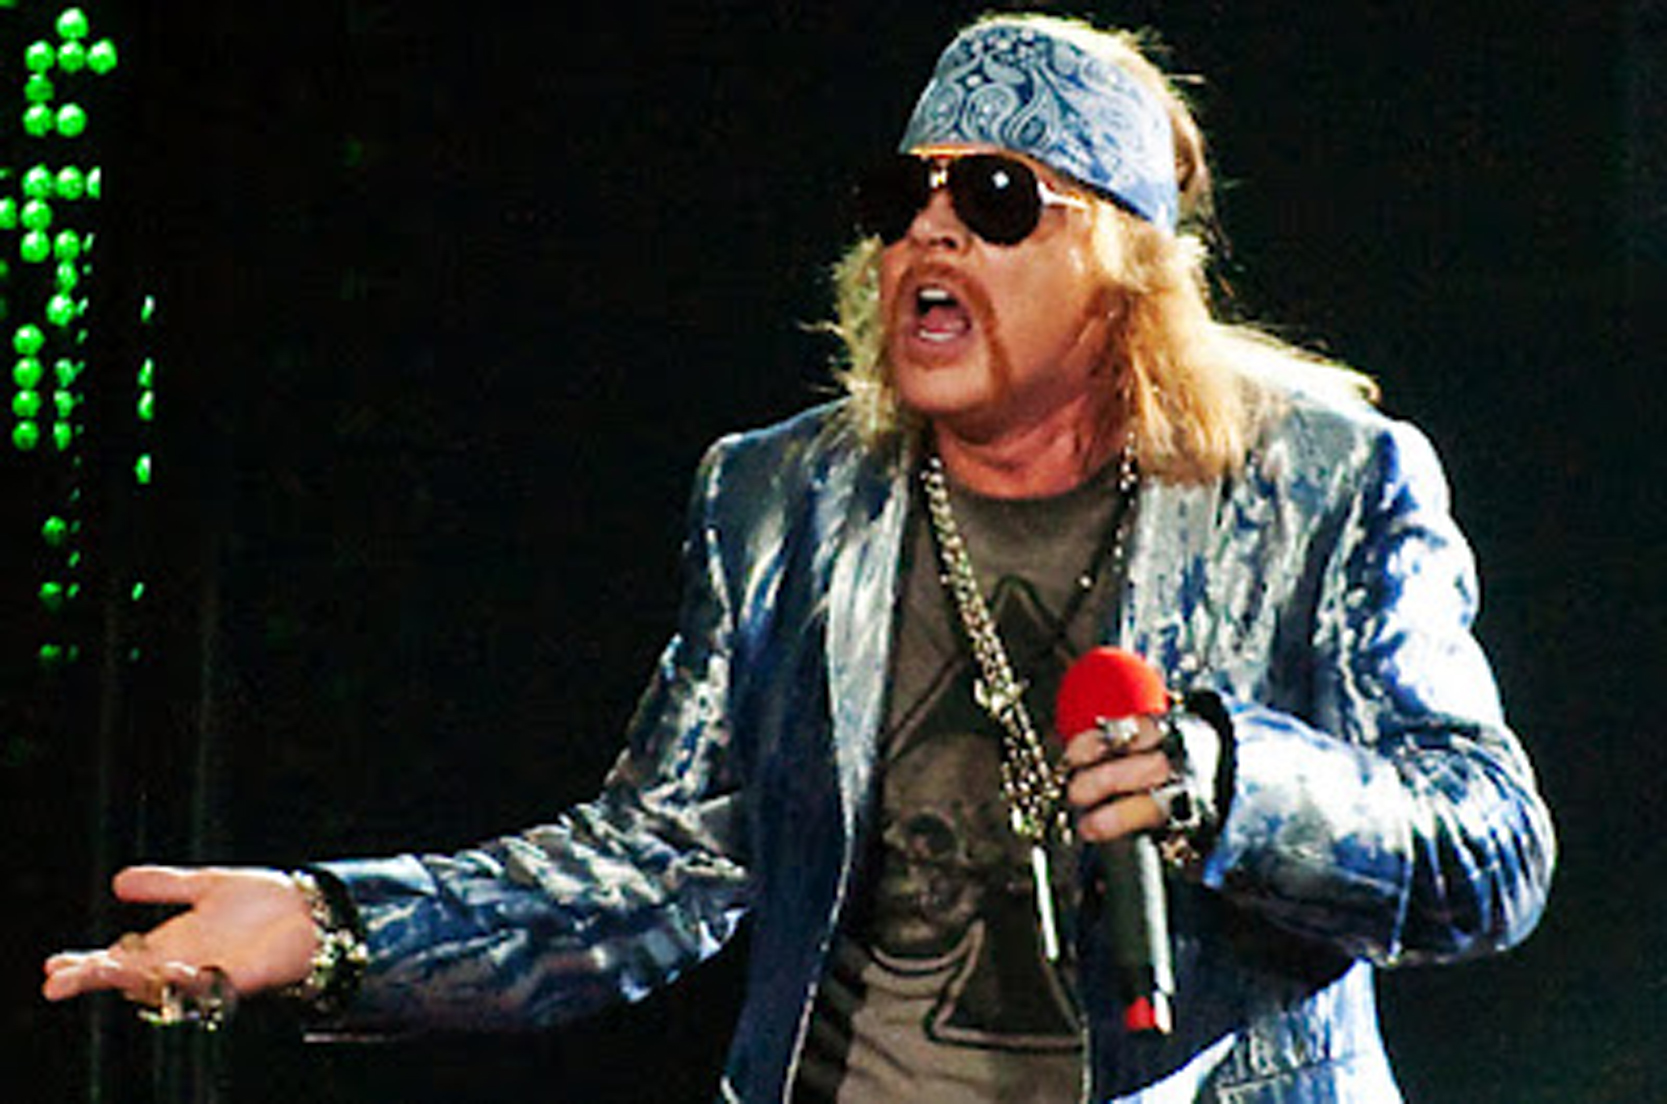 In the song 'Sweet Child of Mine' when Axl rose sang 'Where do we go now' He actually wanted to know the lyrics after this.